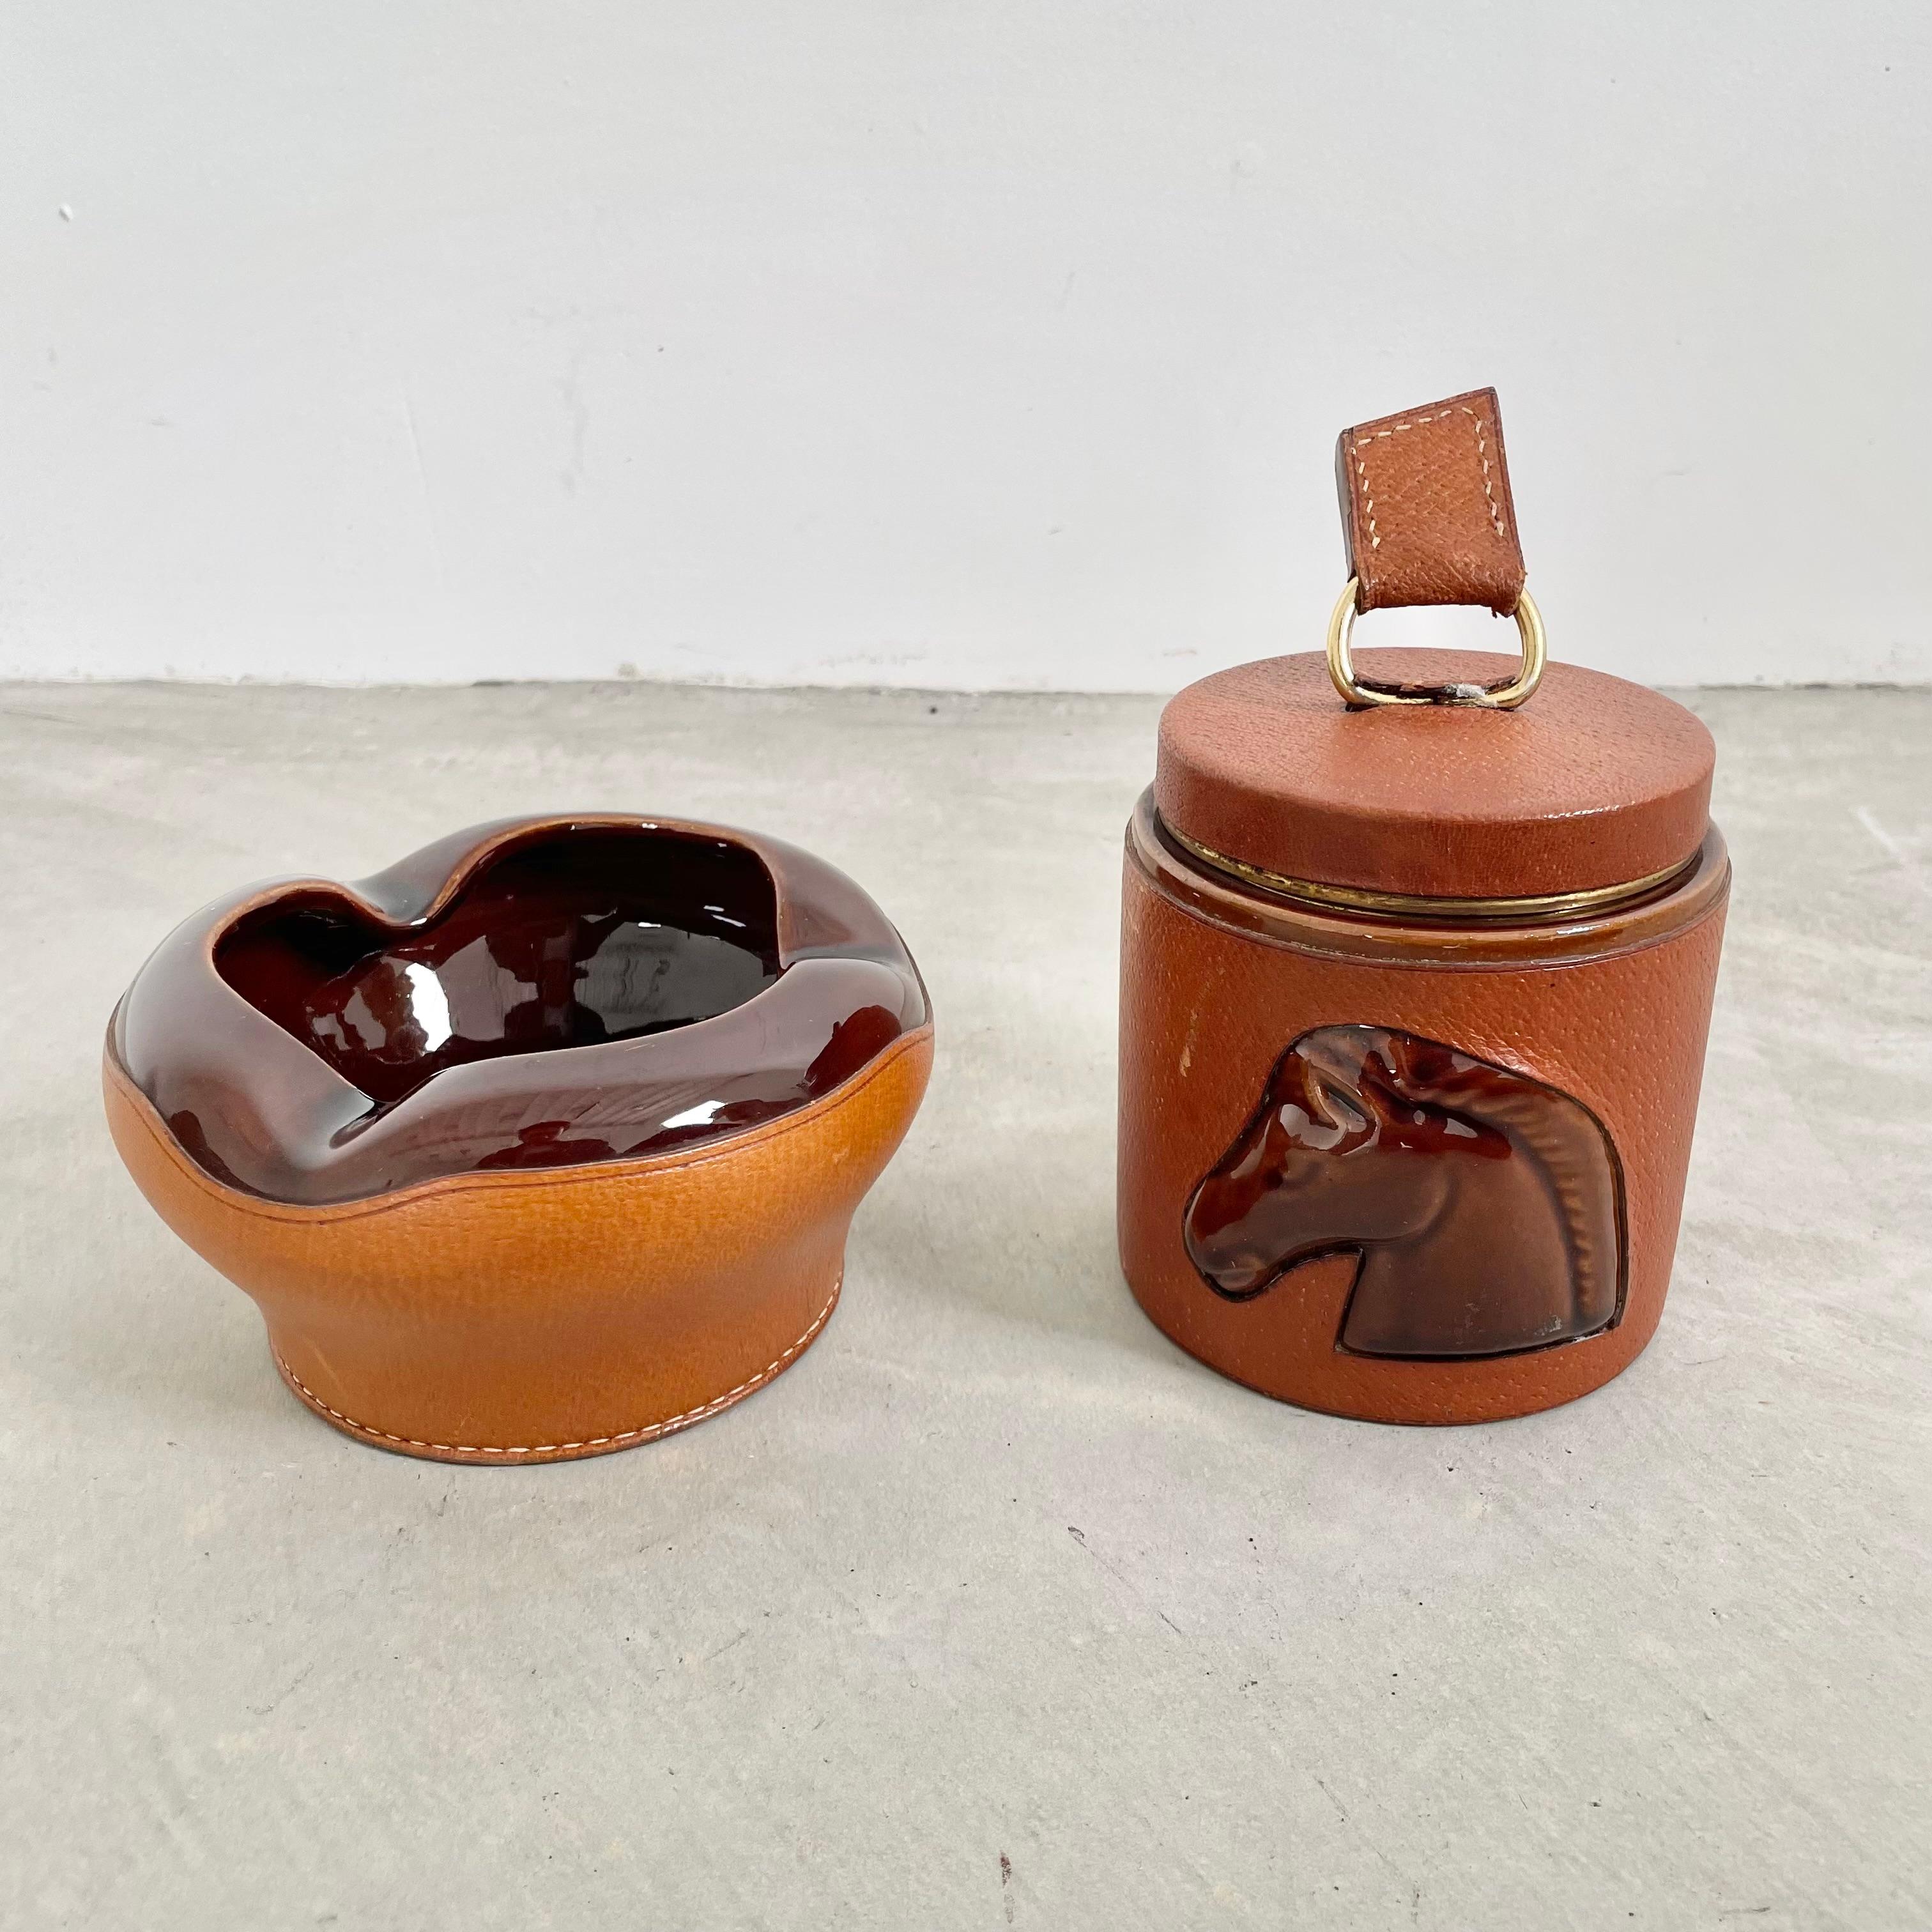 Handsome leather and ceramic smoking set by Longchamp. Cigarette holder opens up to reveal a cigarette dispenser which fans out and compacts back down when pushing back into the jar. Stamped with Lonchamp - France and logo on the base of the